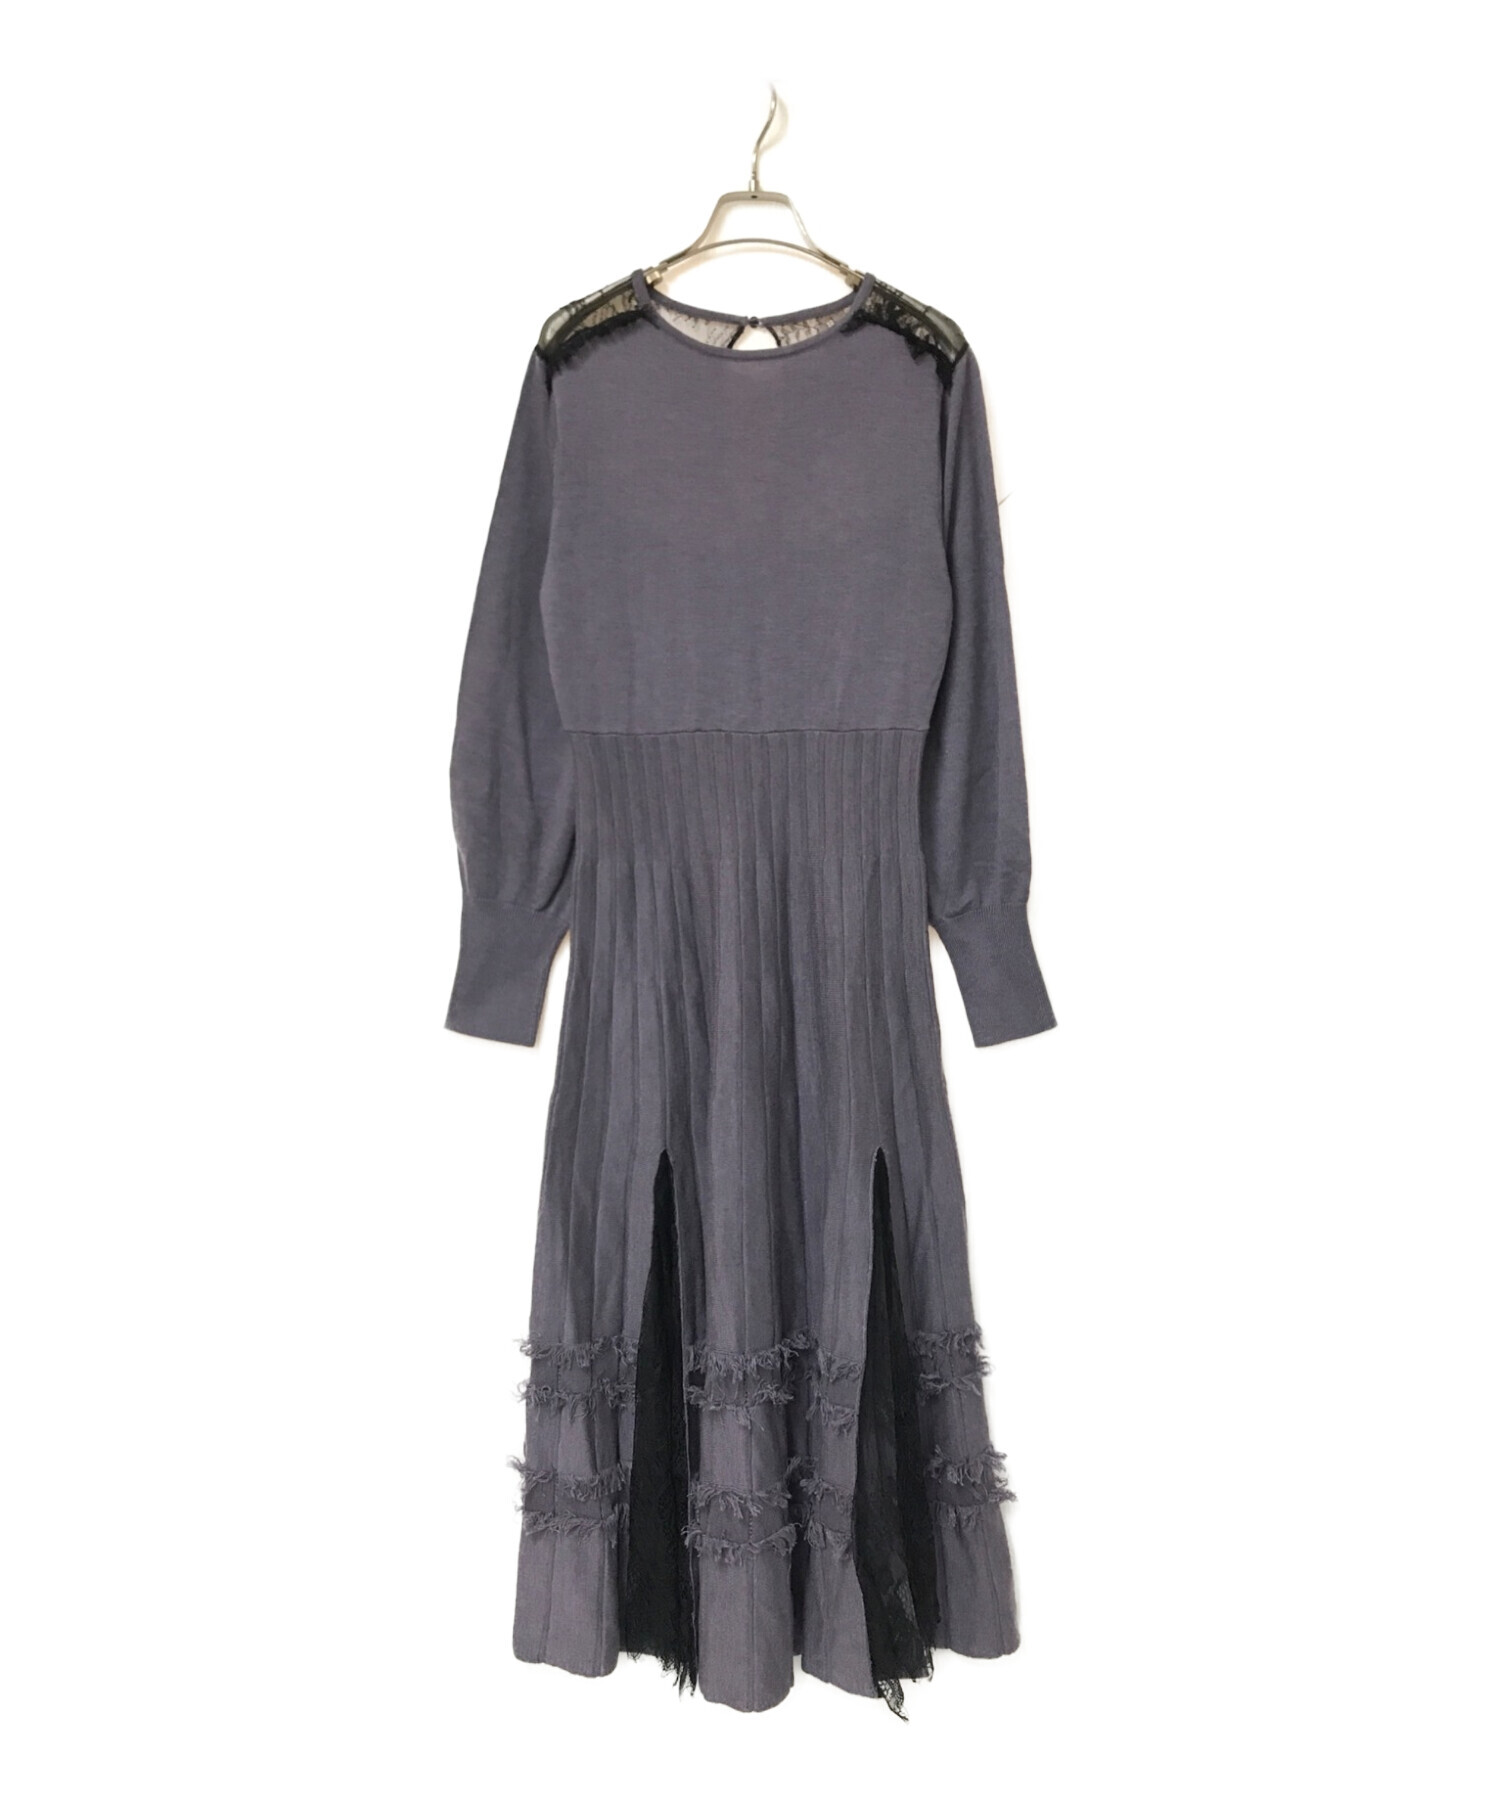 her lip to Lace Trimmed Knit Long Dressブランドタグ洗濯タグあり正規品